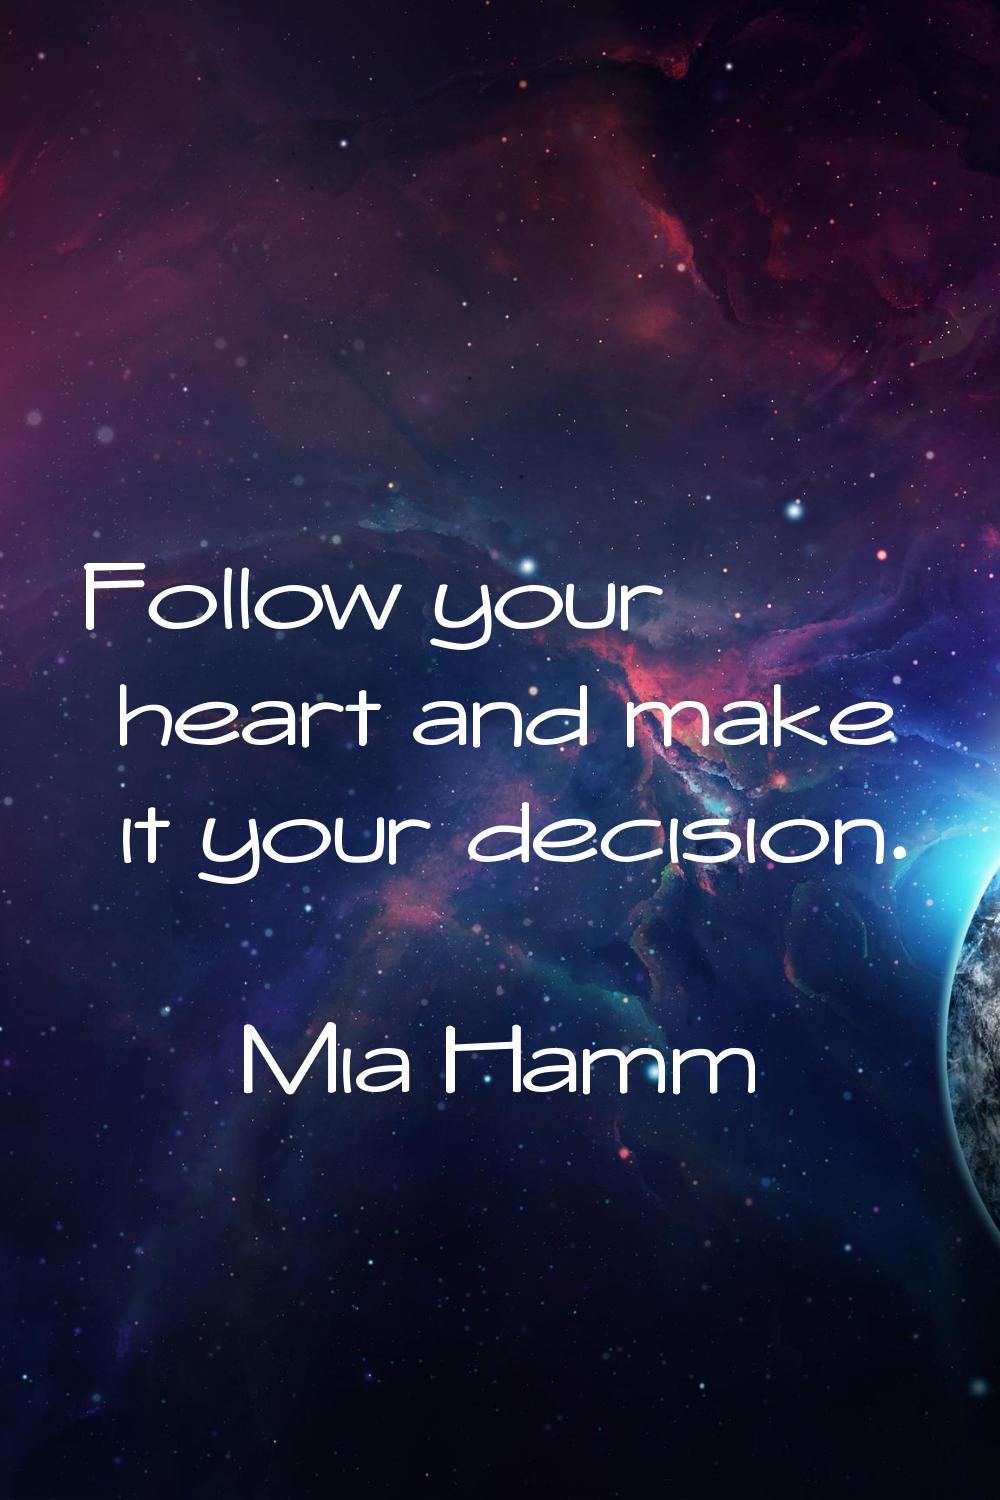 Follow your heart and make it your decision.